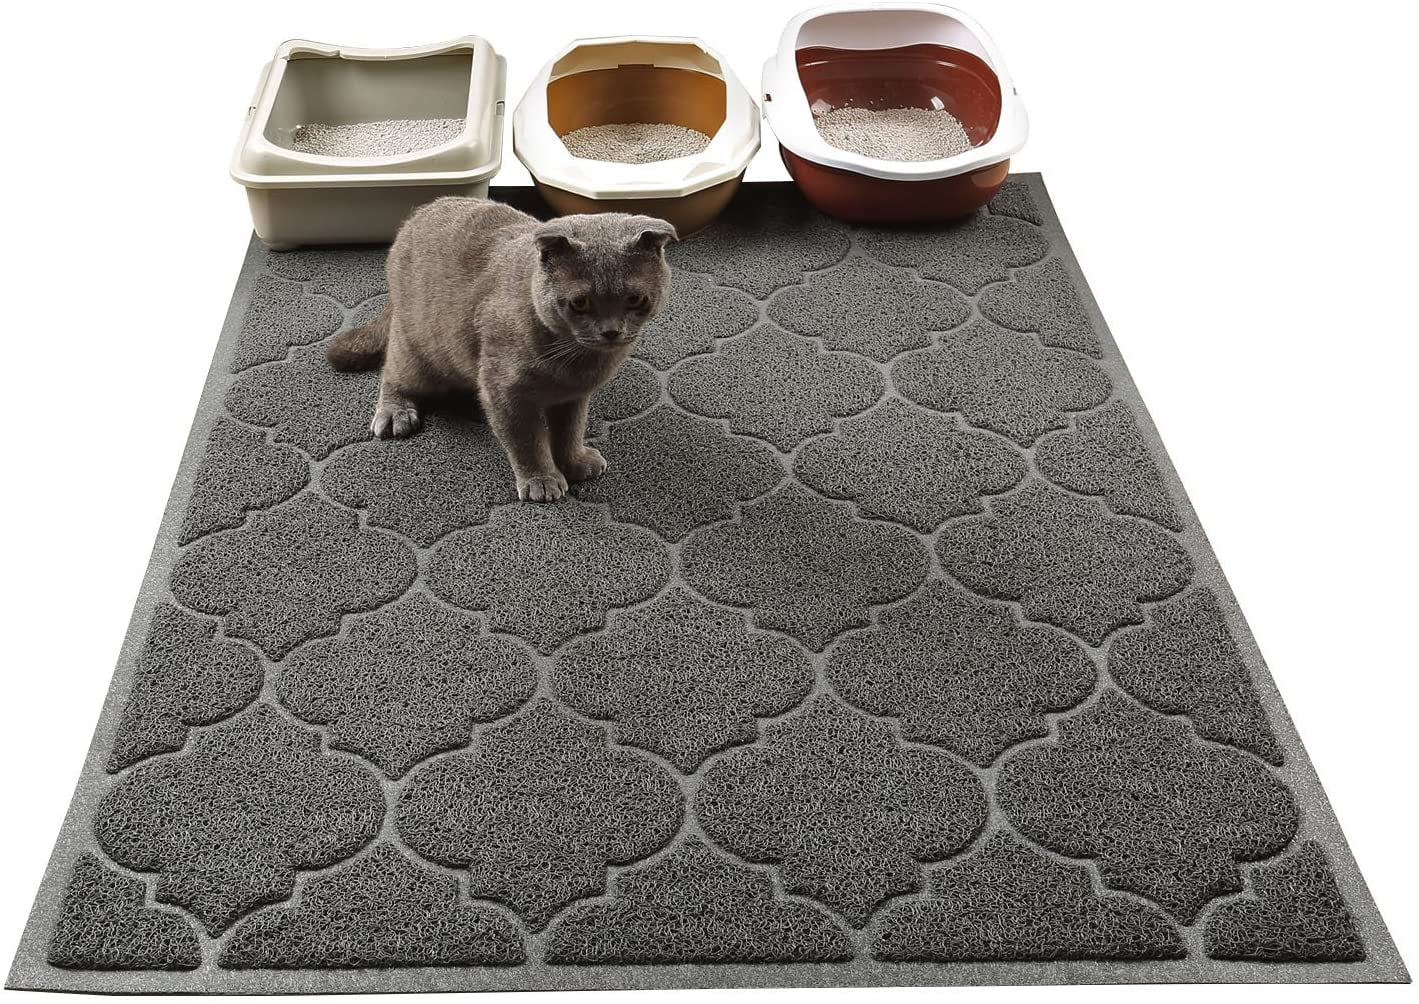 Cat Litter Mat, XL Super Size, Phthalate Free, Easy to Clean, 46x35